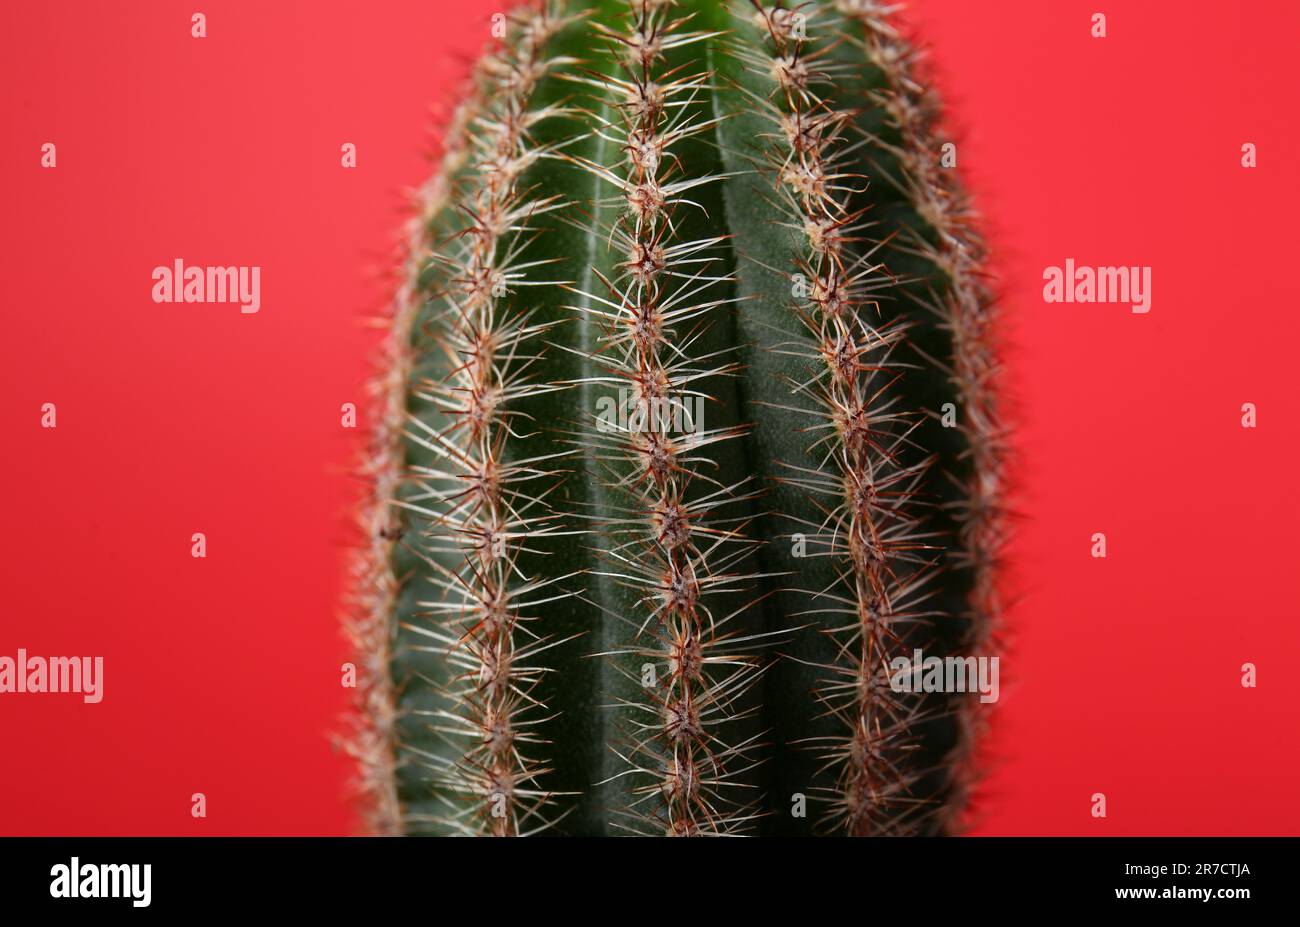 Beautiful green cactus on red background, closeup. Tropical plant Stock Photo